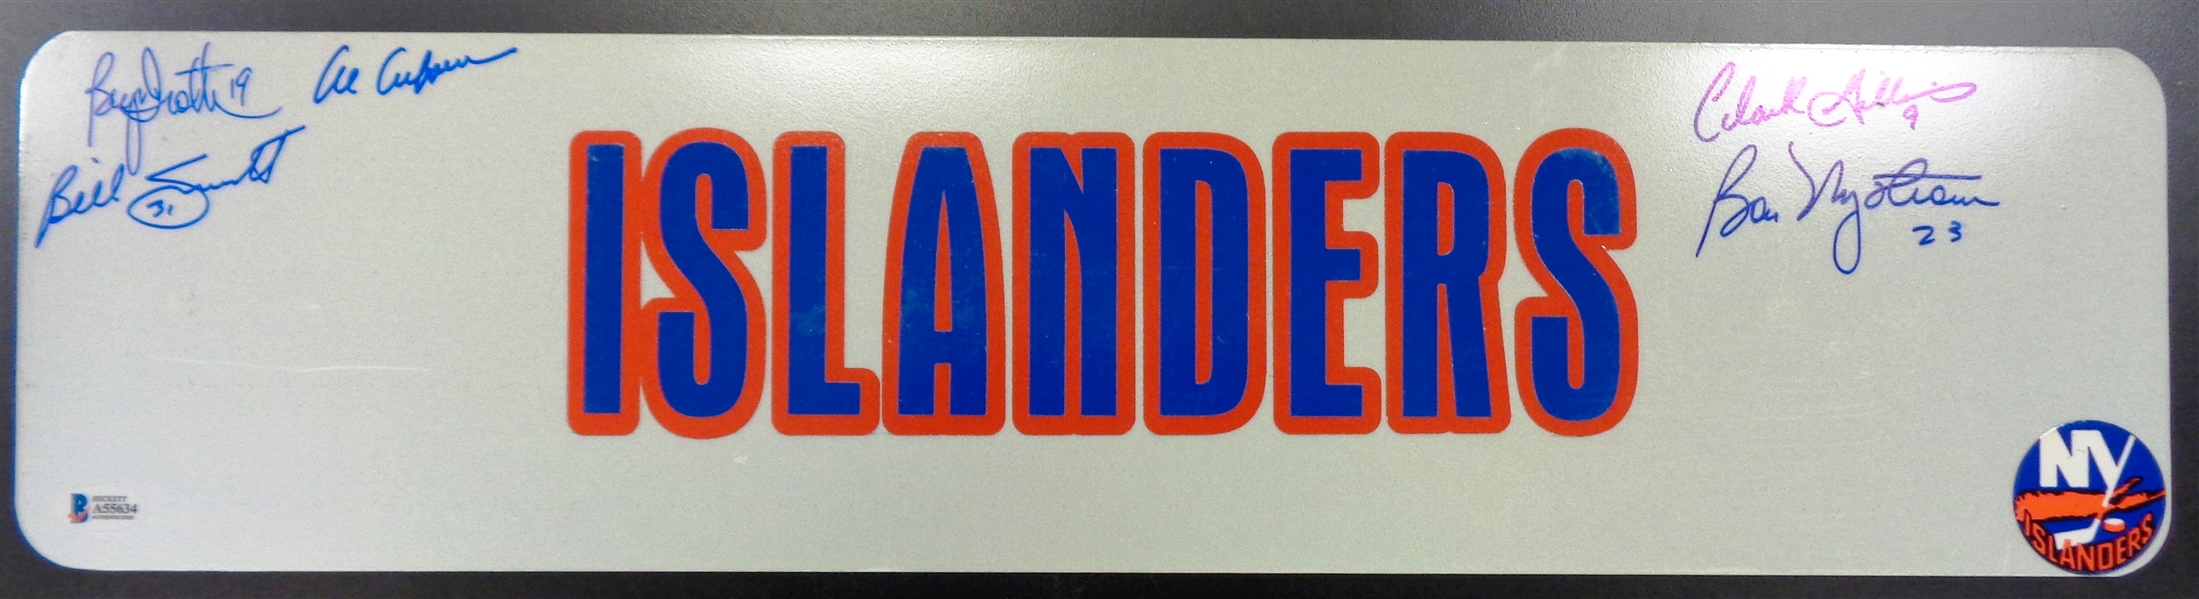 NY Islanders Autographed by 5 HOFers 24x6 Metal Sign